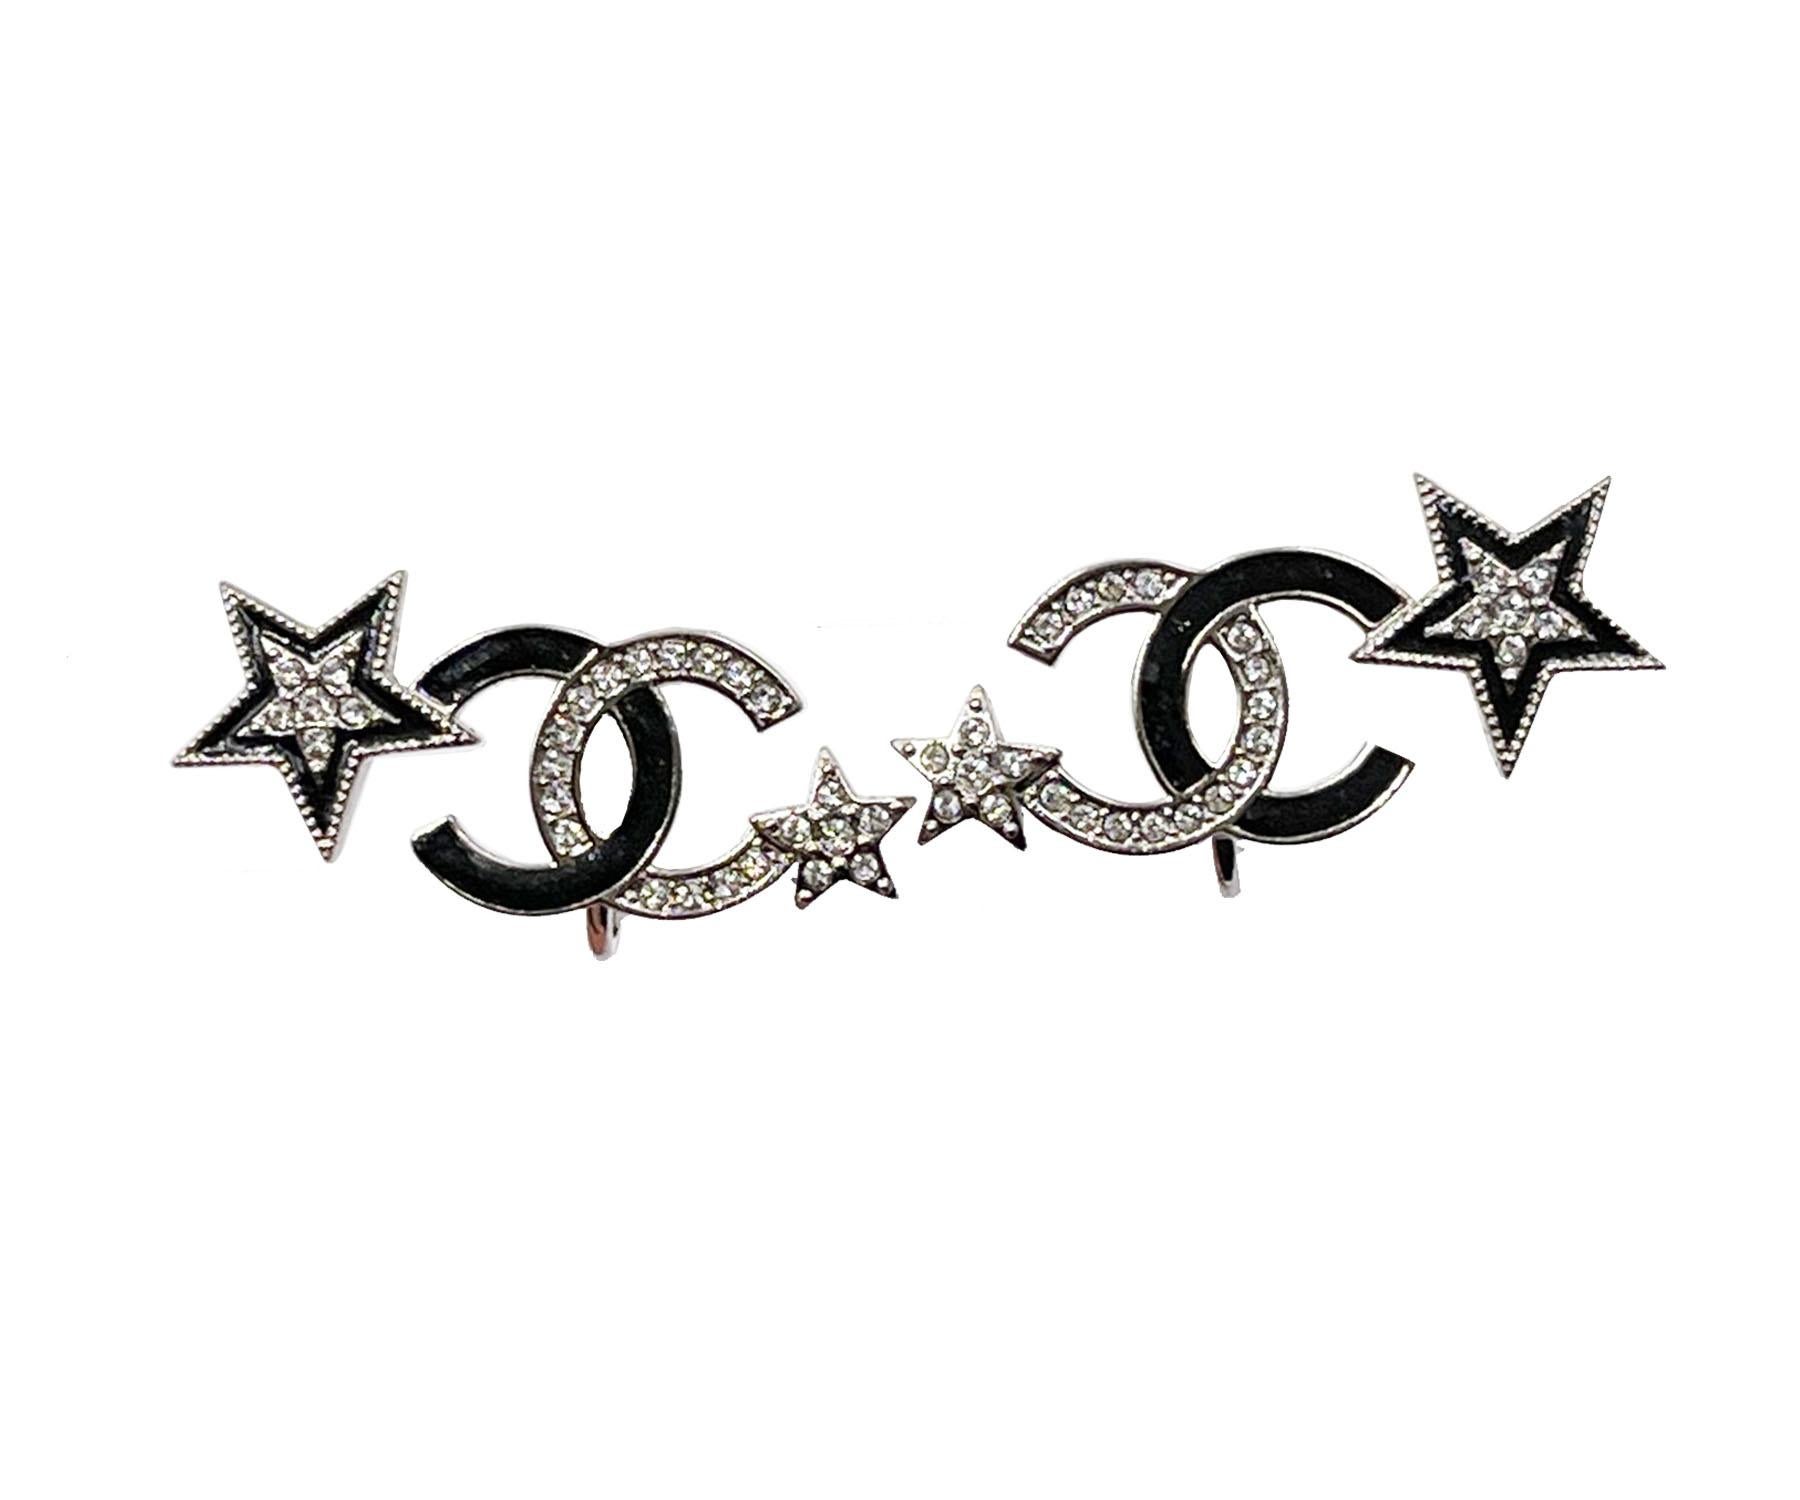 Chanel Brand New Silver CC Black Enamel Star Ear Cuff Piercing Earrings

*Marked 23
*Made in France
*Comes with the original box, pouch, tag, booklet, ribbon and camellia flower
*Brand New

-It is approximately 1.25